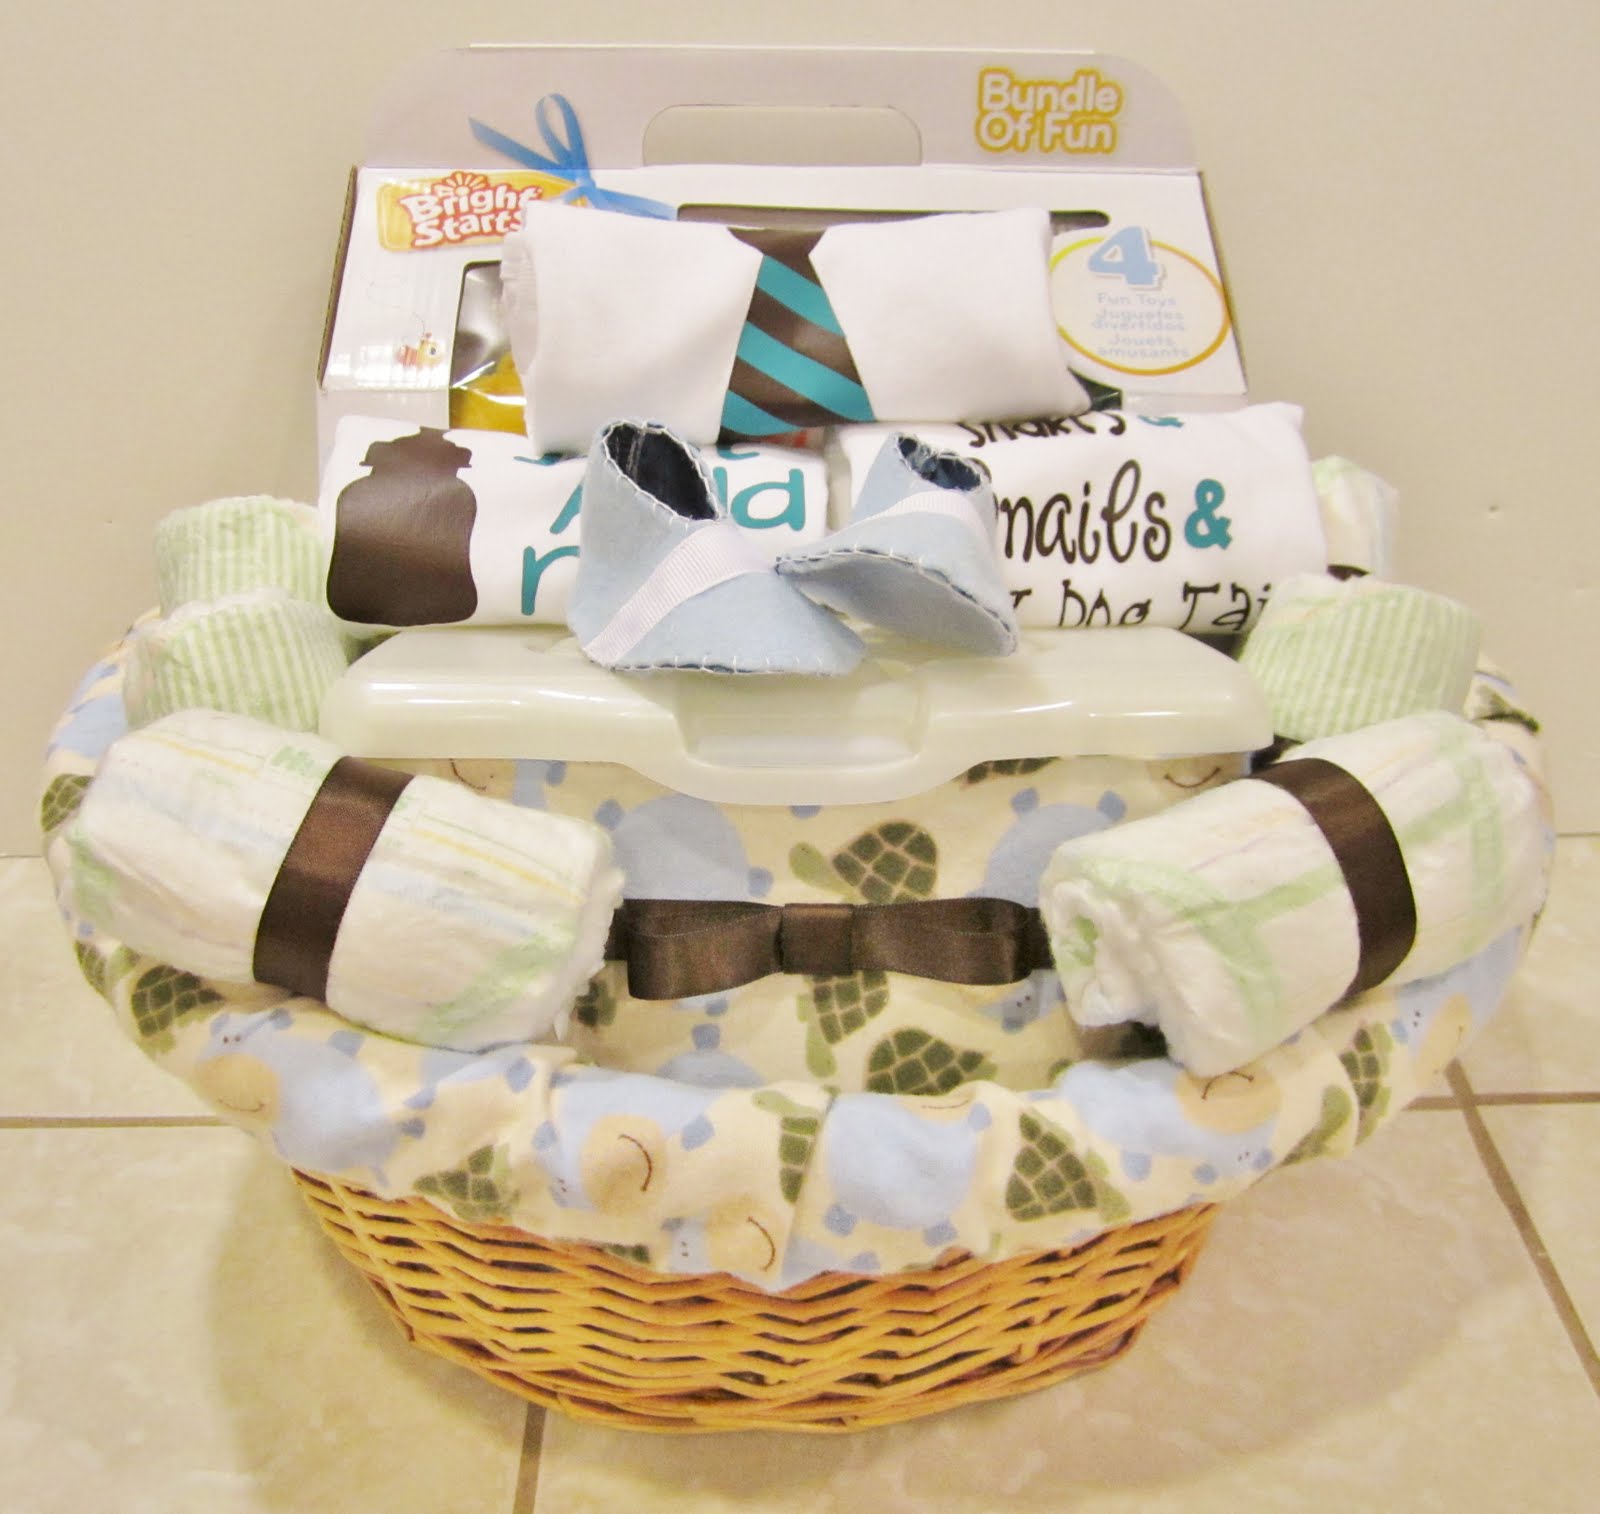 Full Size of Baby Shower:enamour Baby Shower Gifts For Guests Picture Ideas Baby Shower Gifts For Guests And Ideas Para Baby Showers With Baby Shower Cakes Plus Baby Shower Names Together With Surprise Baby Shower As Well As Arreglos Baby Shower Niño